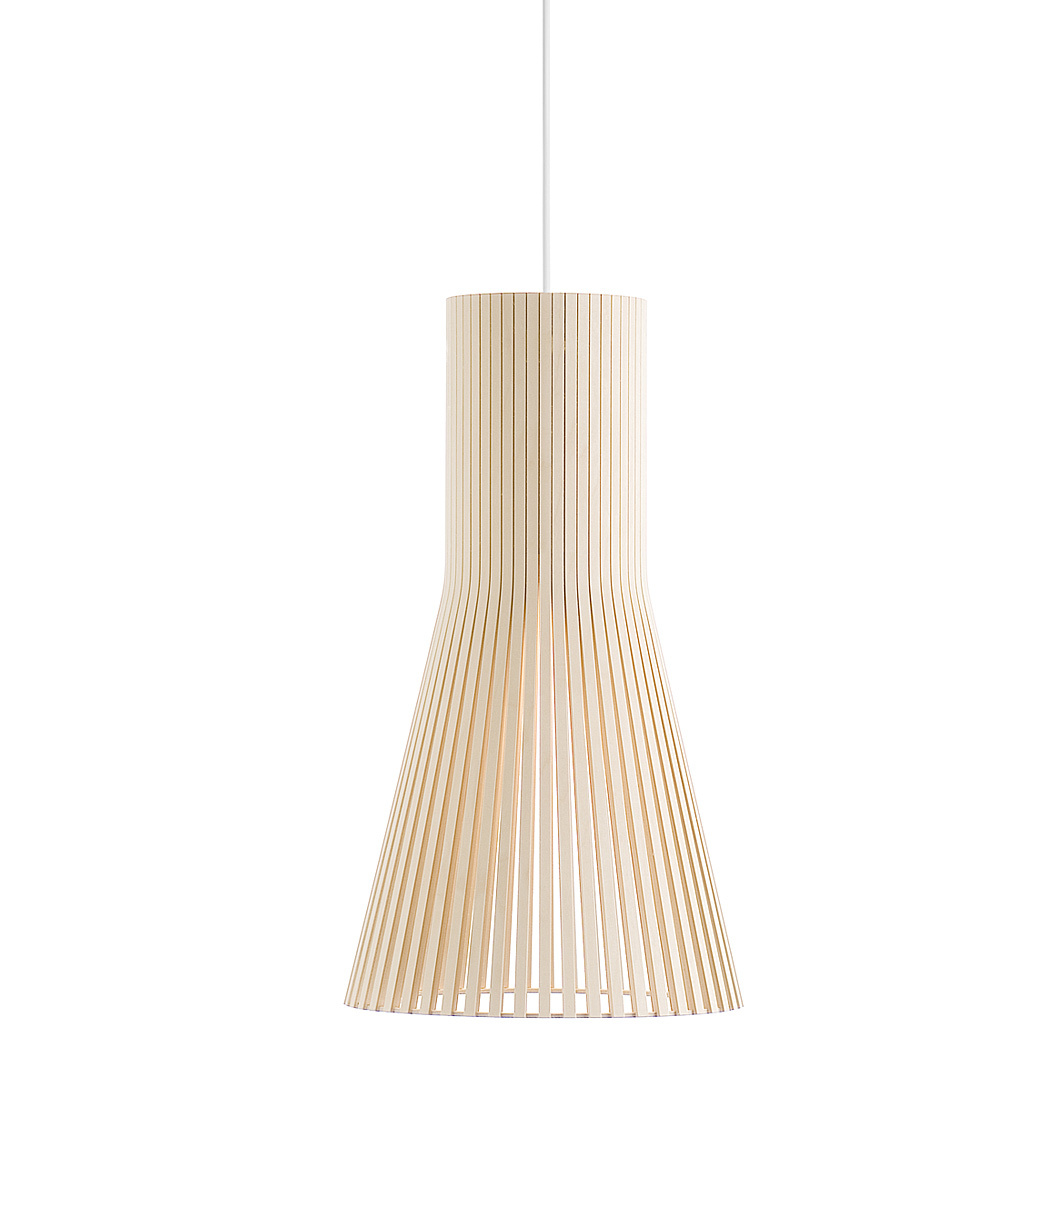 Secto Small 4201 pendant lamp is available in natural birch